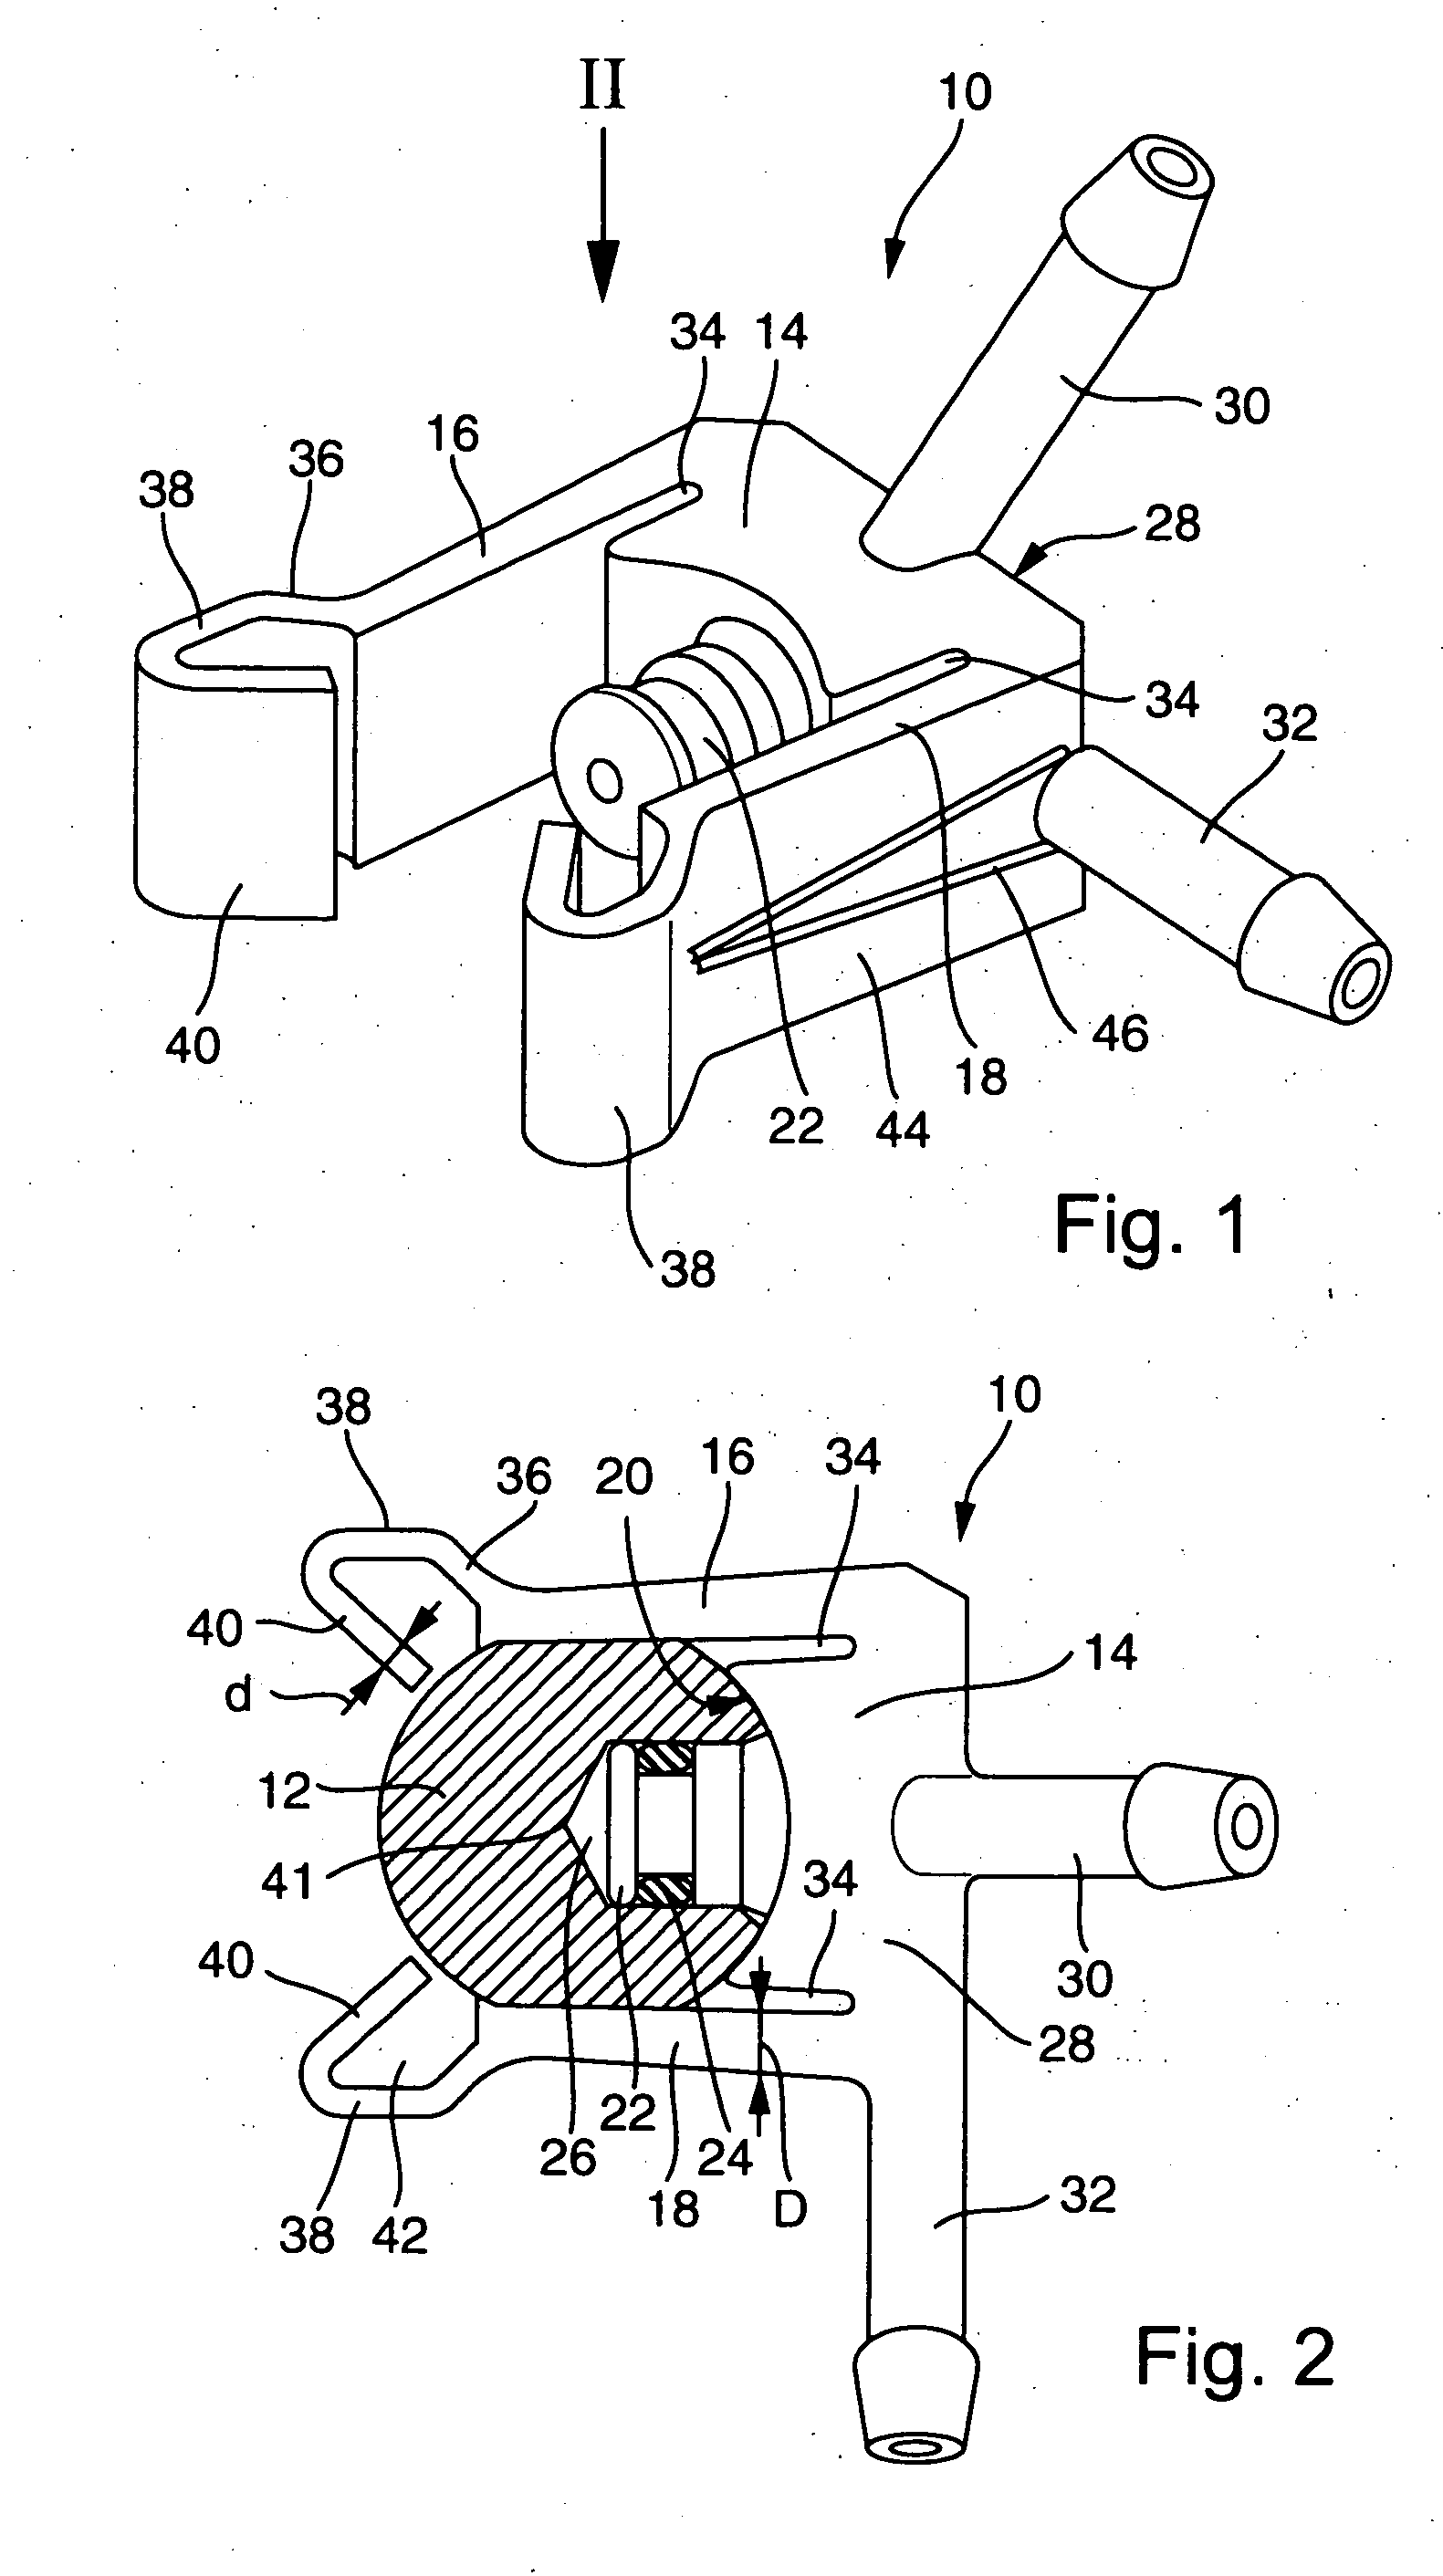 Device to attach a fuel return line to a fuel injector and device to suction fuel from a fuel injector